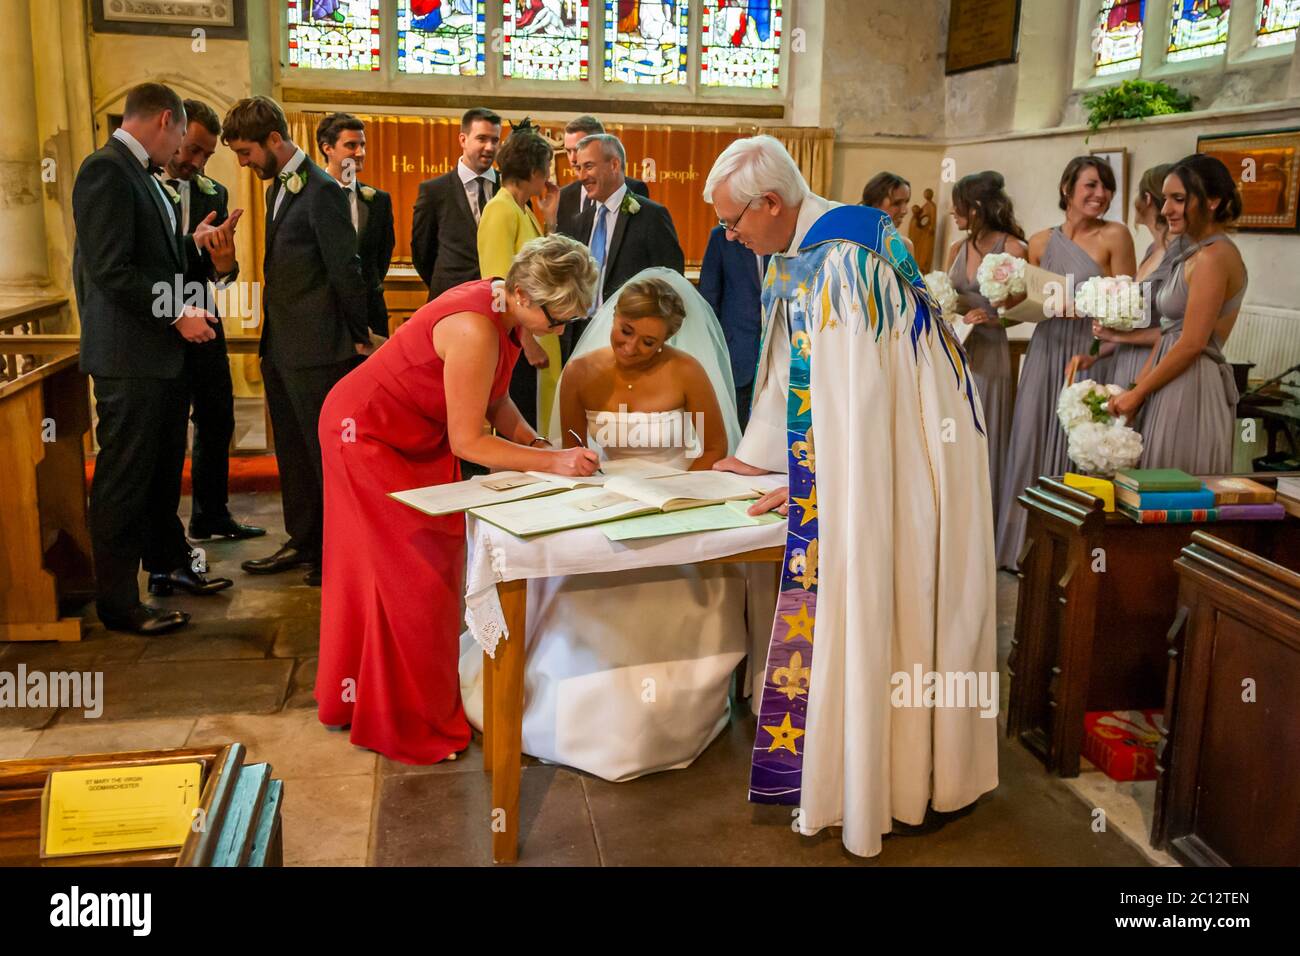 The bride signs the wedding documents in the Anglican Church. British Wedding in South Cambridgeshire, England Stock Photo